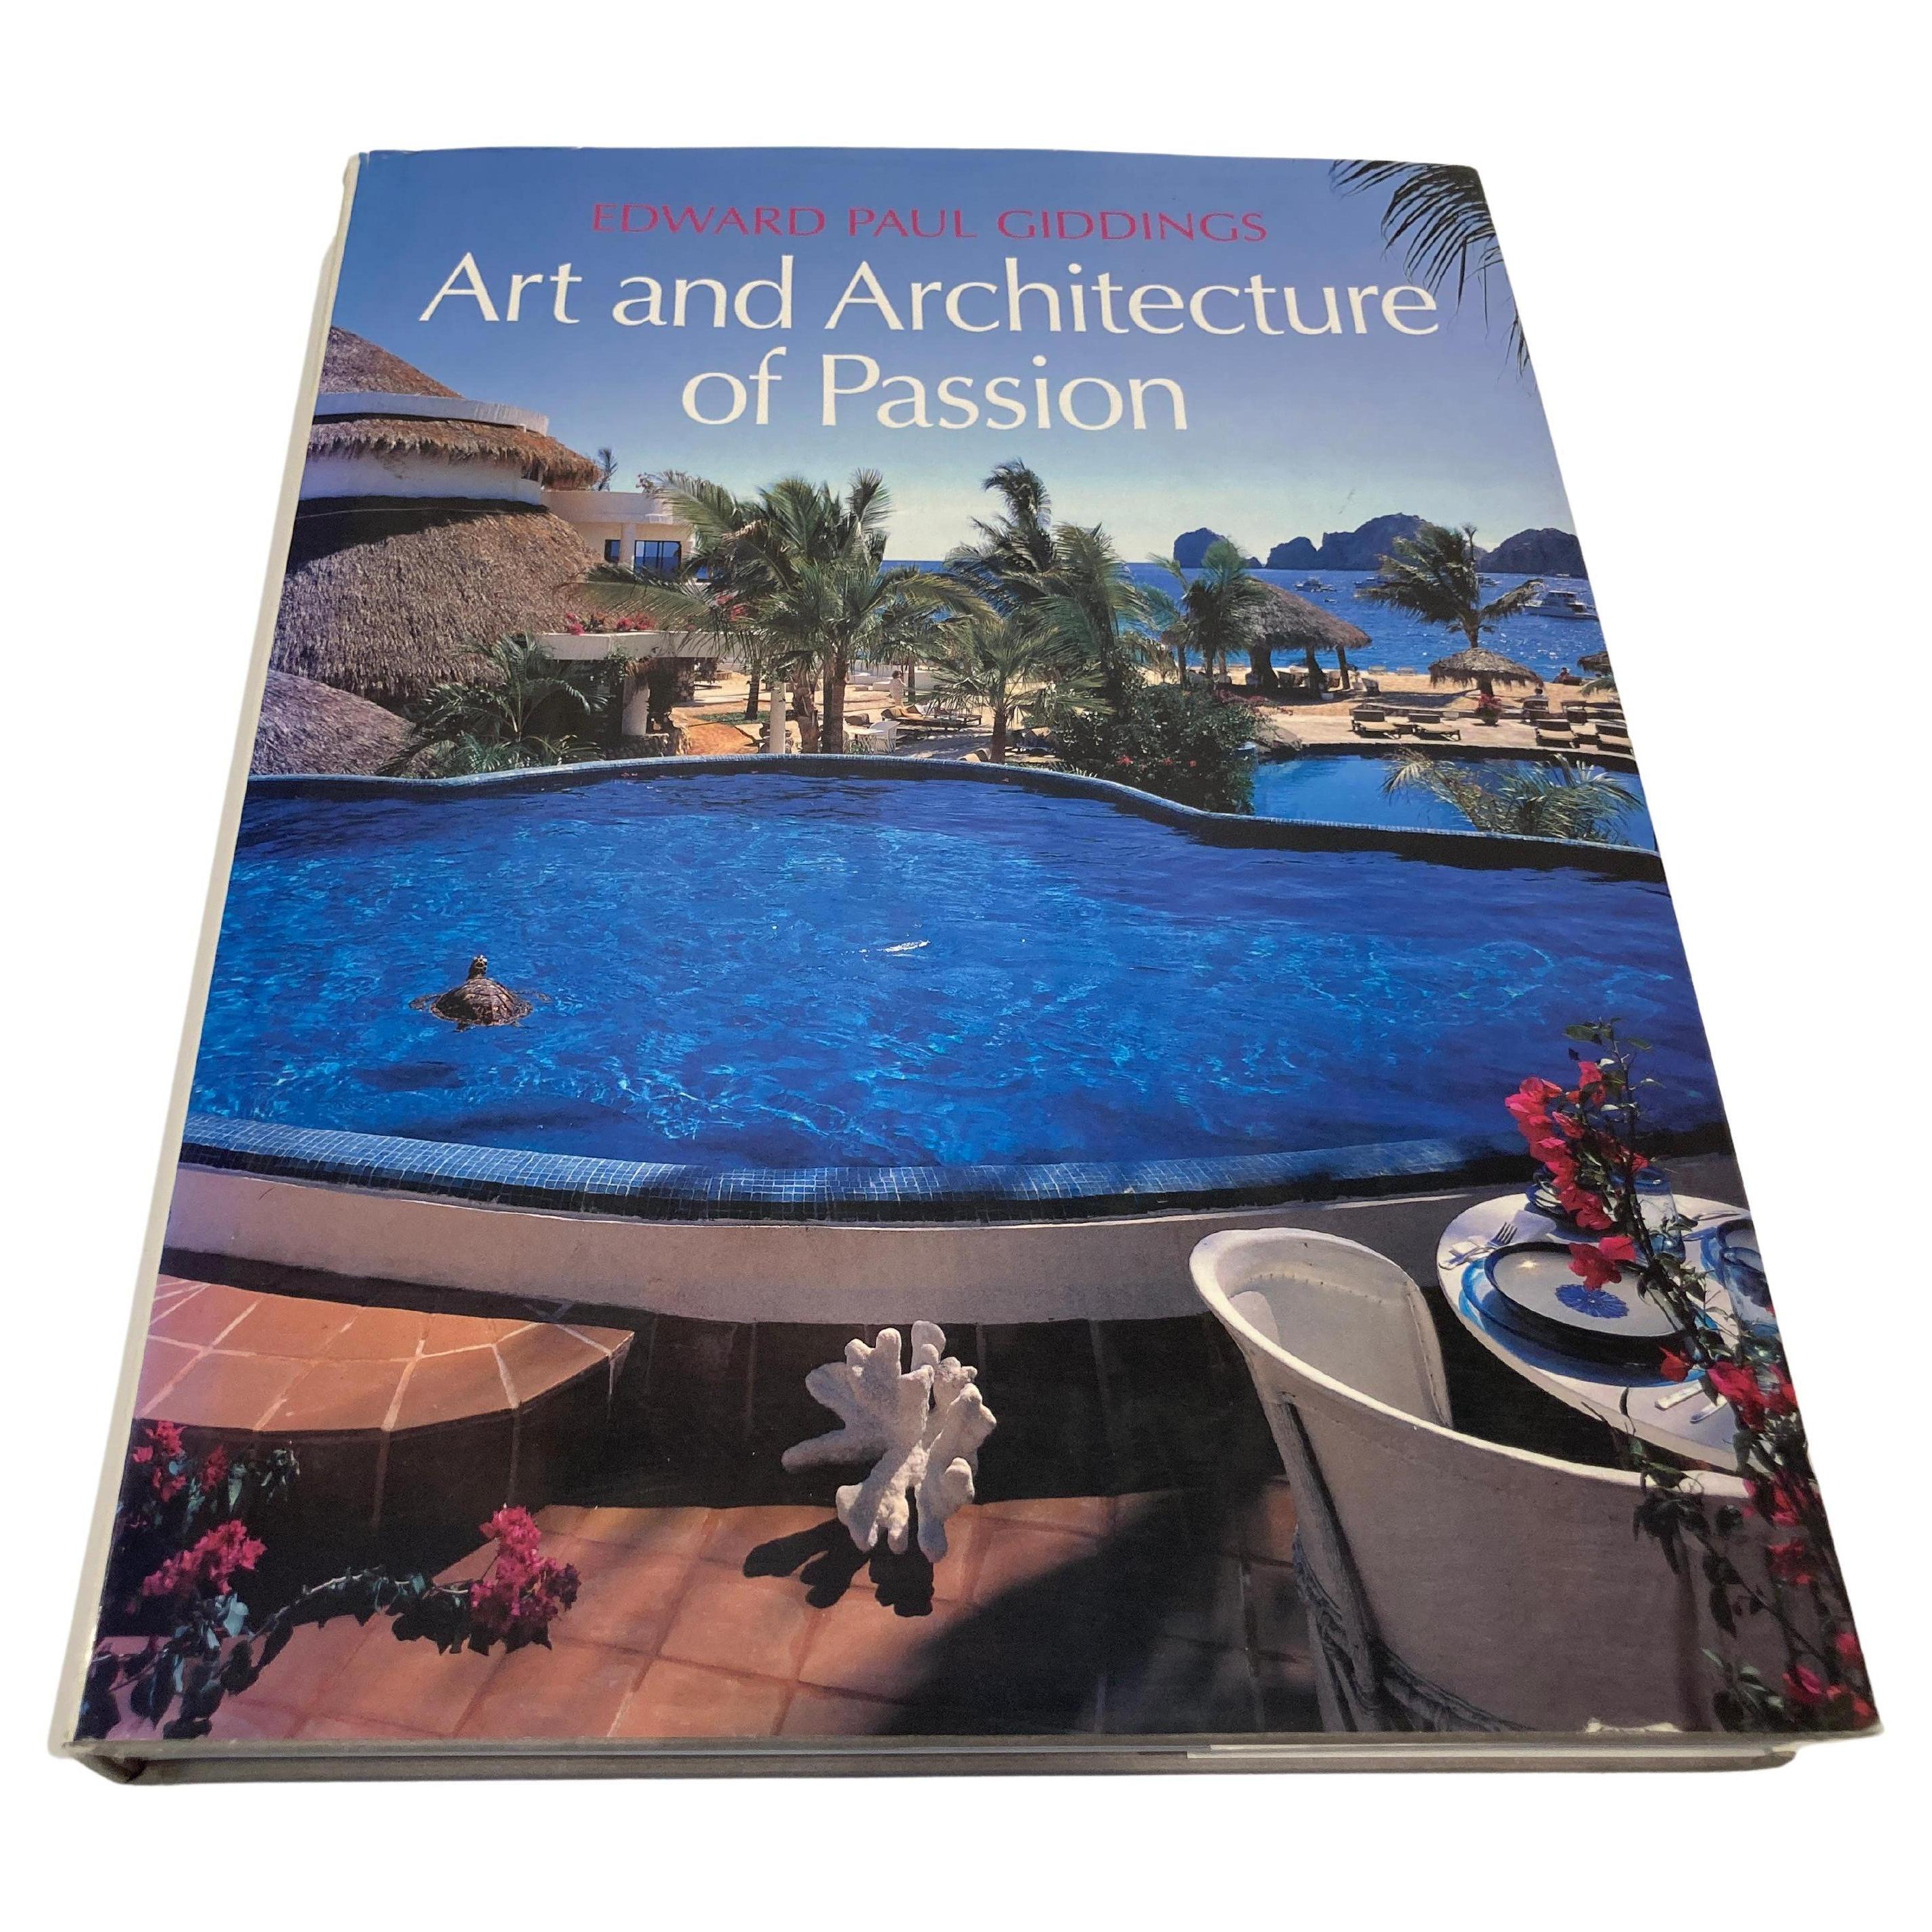 Edward Paul Giddings: Art And Architecture Of Passion Hardcover Book.
By Giddings, Patricia.
Coffee table book about Architect and Artist Edward Giddings. Story of his work and life and times. Nice copy of this book on the Southern California